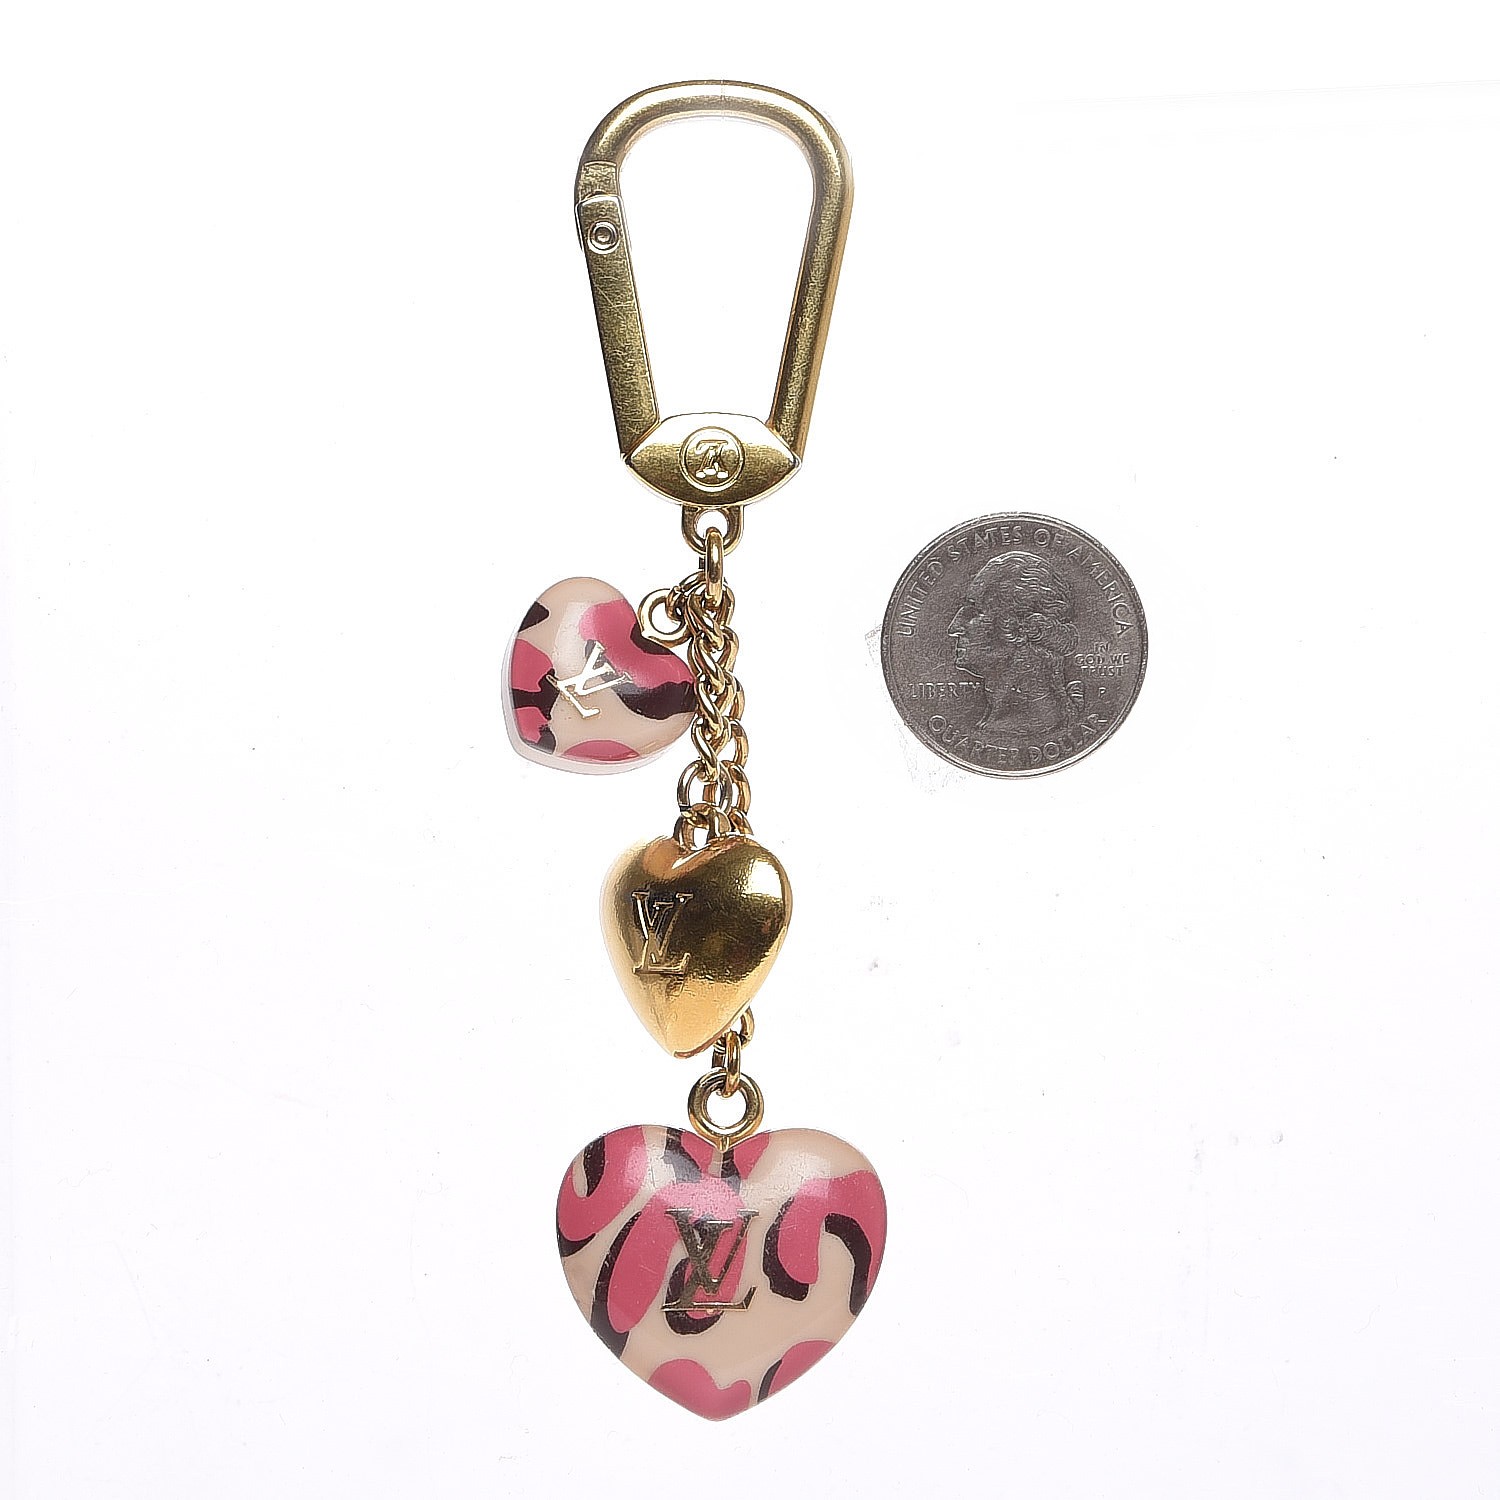 NEW LOUIS VUITTON LIMITED FUN & FACE LION BAG CHARM AND KEY HOLDER KEYCHAIN  DHL